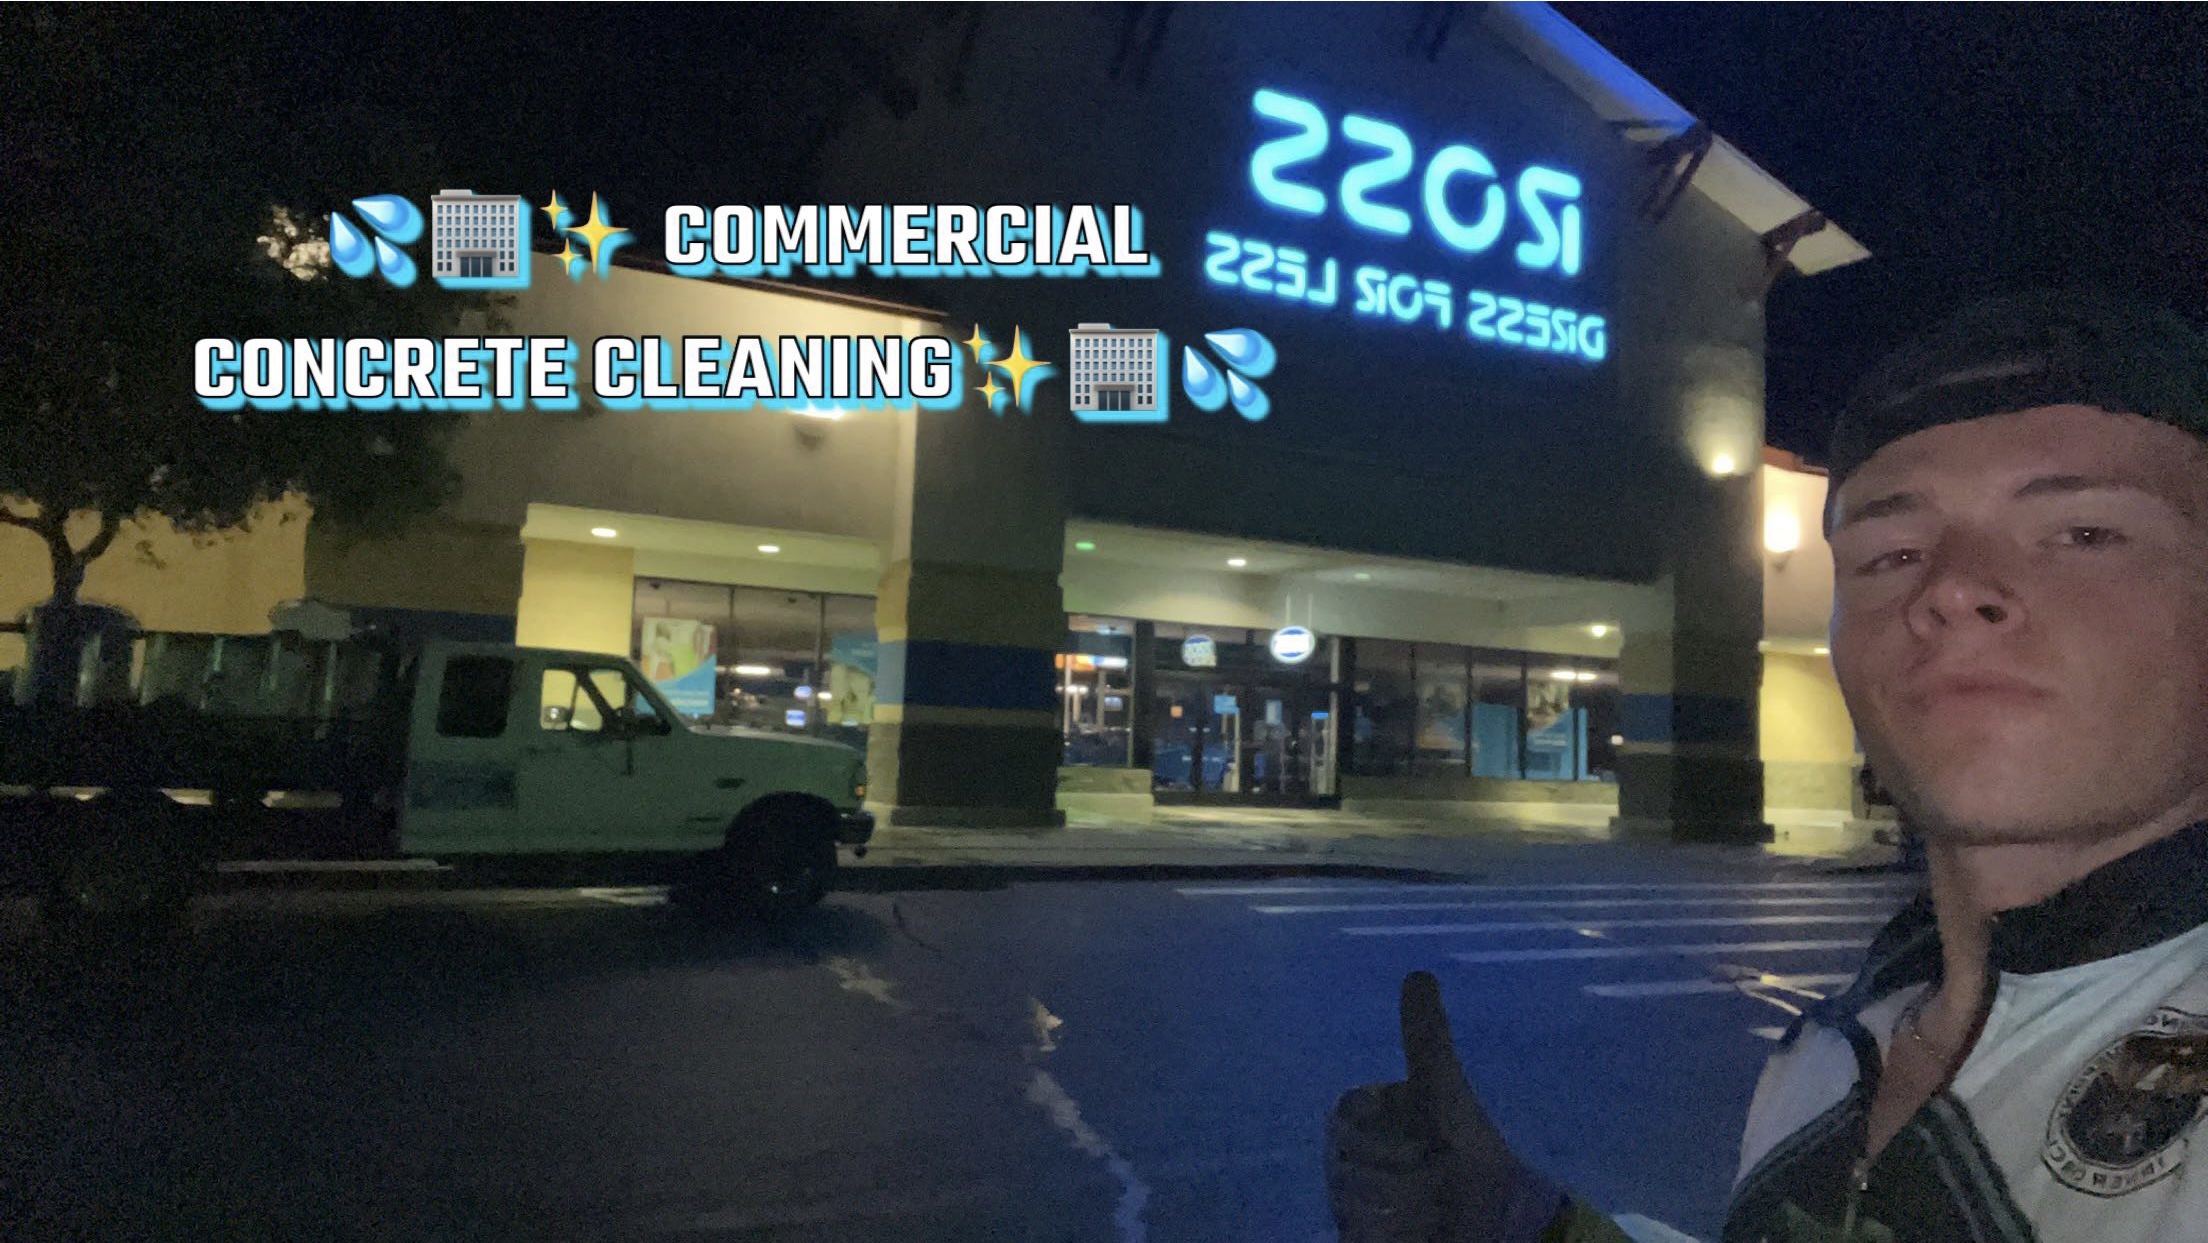 Commercial Concrete Cleaning and Gum Removal in Turlock, CA